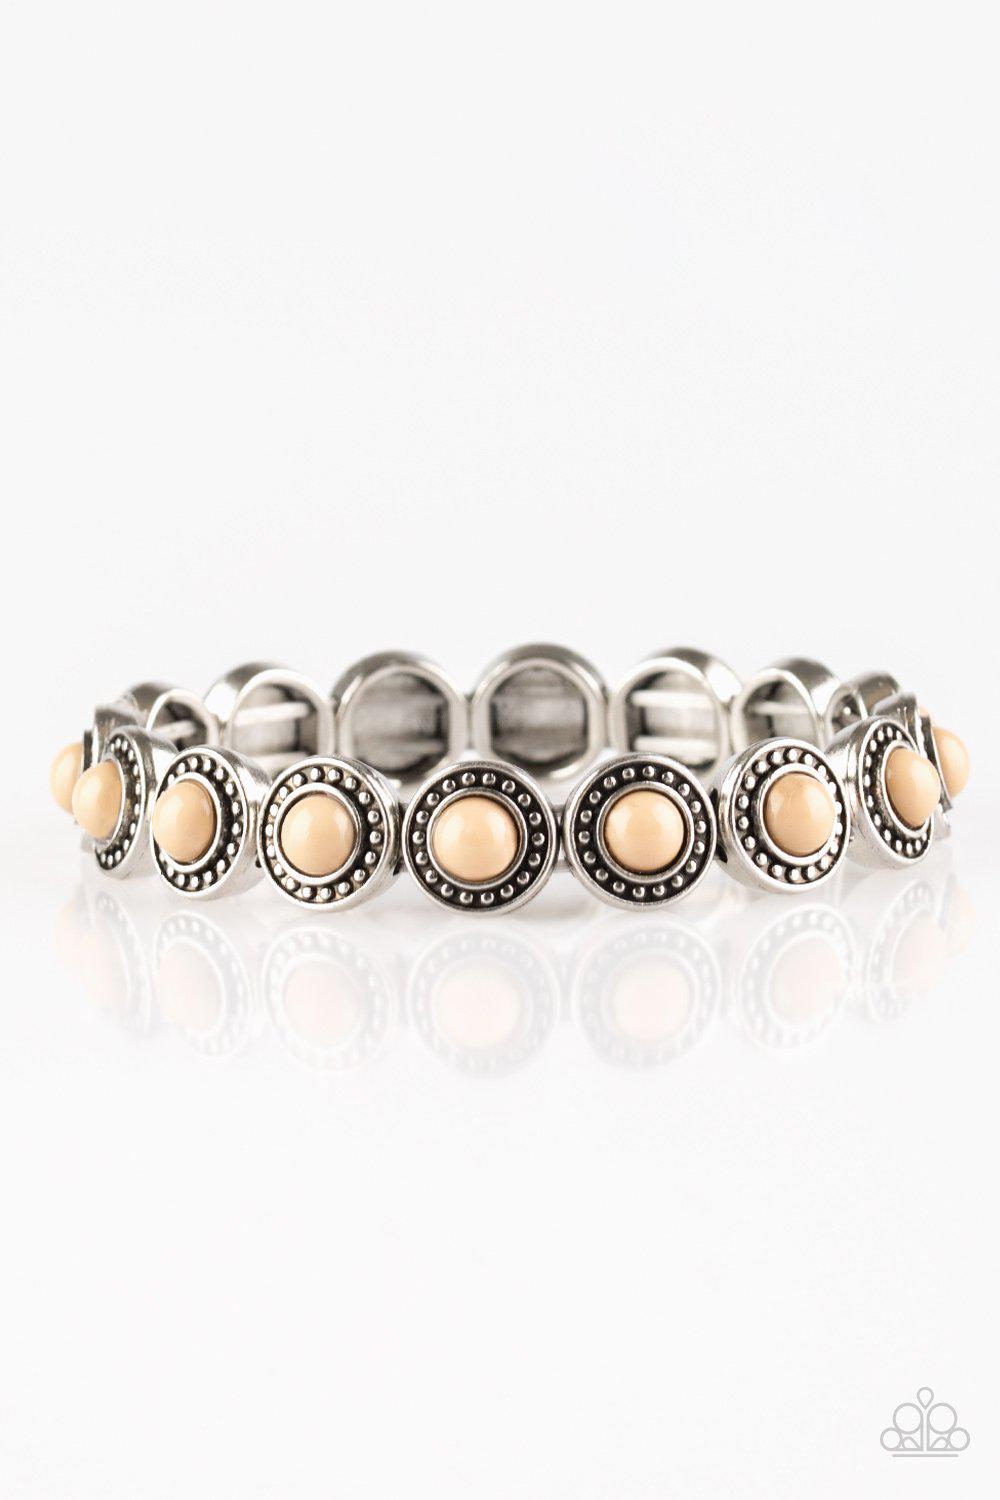 Globetrotter Goals Brown and Silver Bracelet - Paparazzi Accessories-CarasShop.com - $5 Jewelry by Cara Jewels